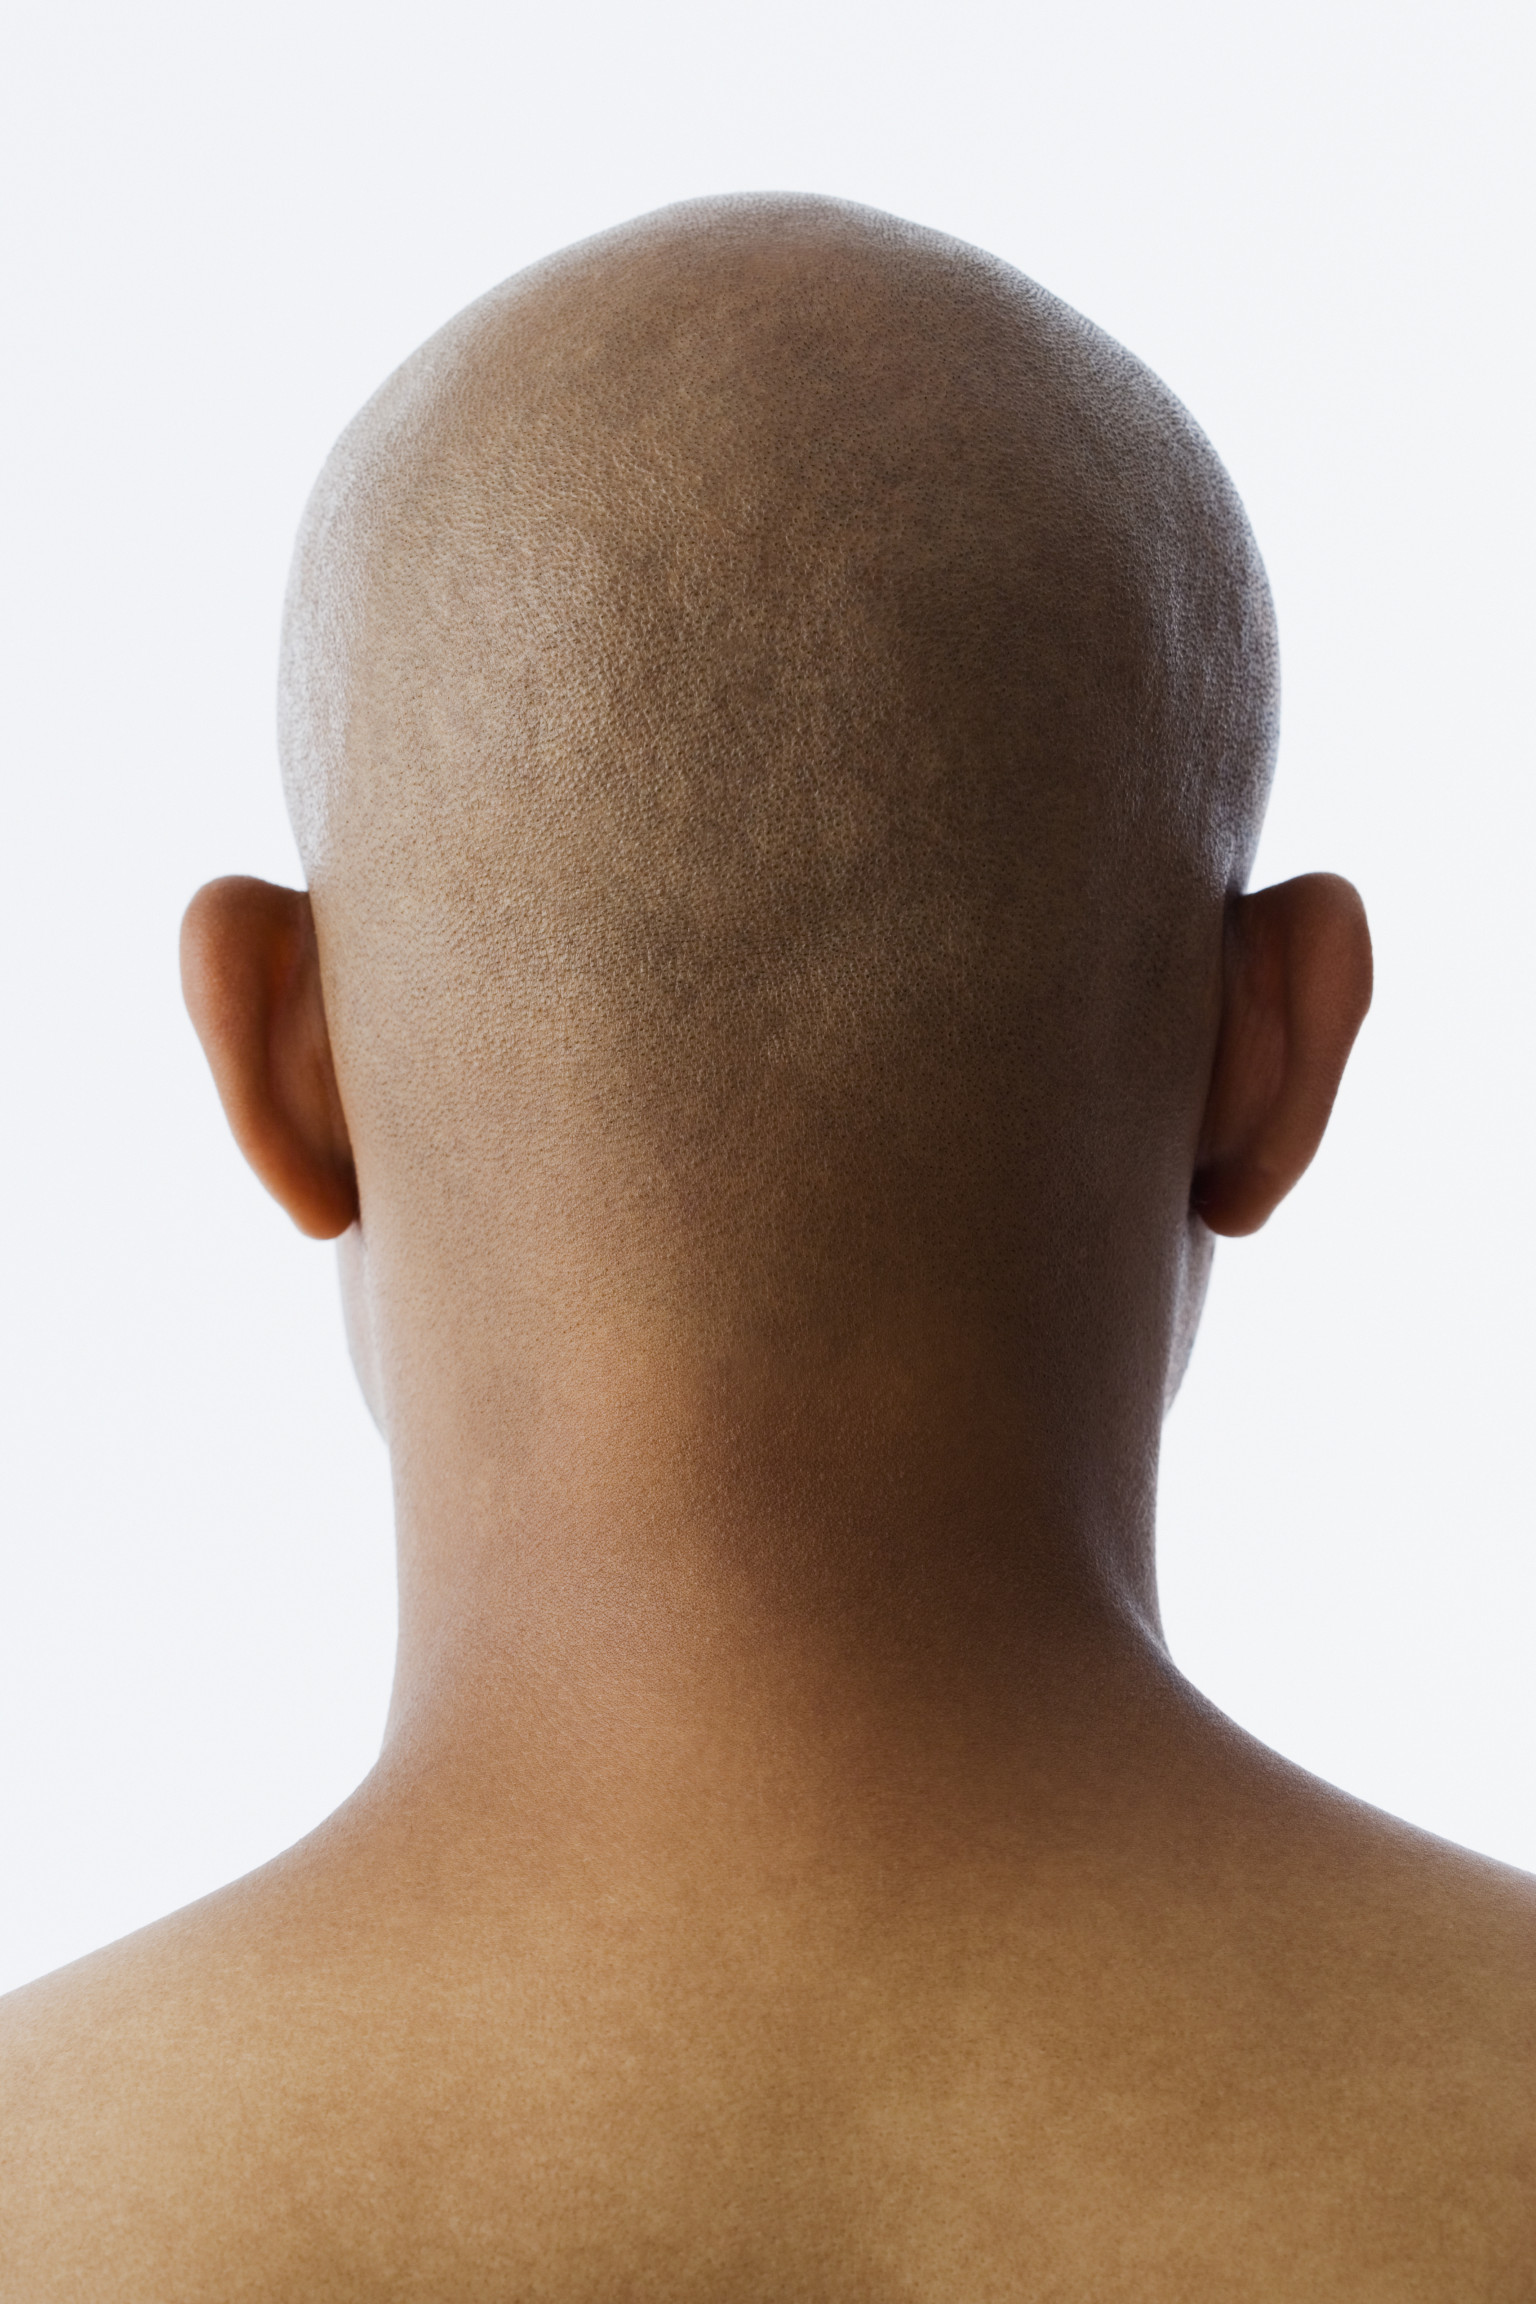 Early Balding May Raise Risk Of ALS Study Finds HuffPost